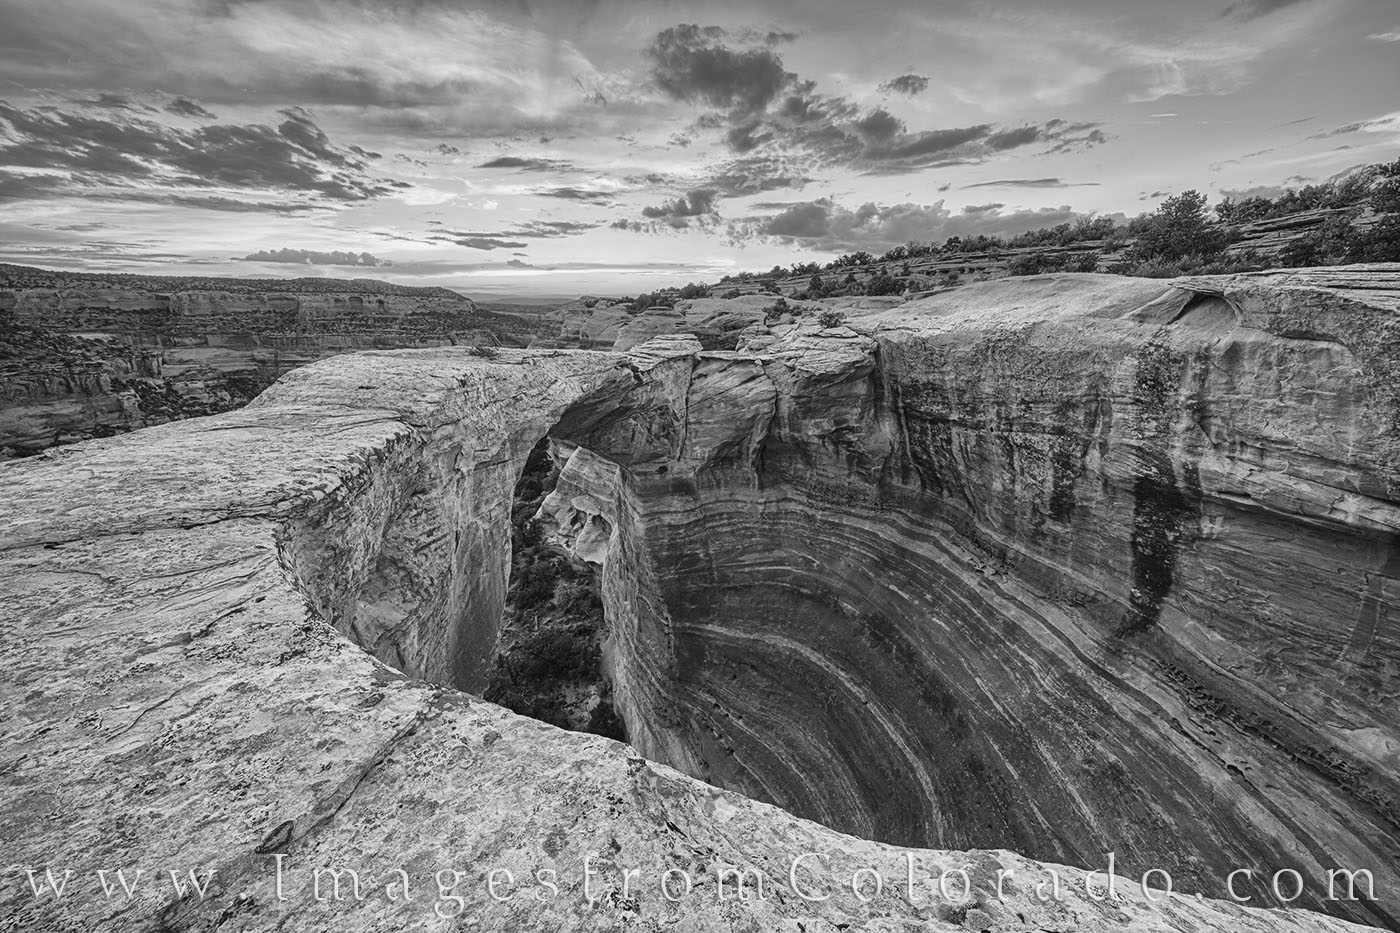 This black and white photograph from Rattlesnake Canyon just west of Grand Junction shows off the curves and textures of the...